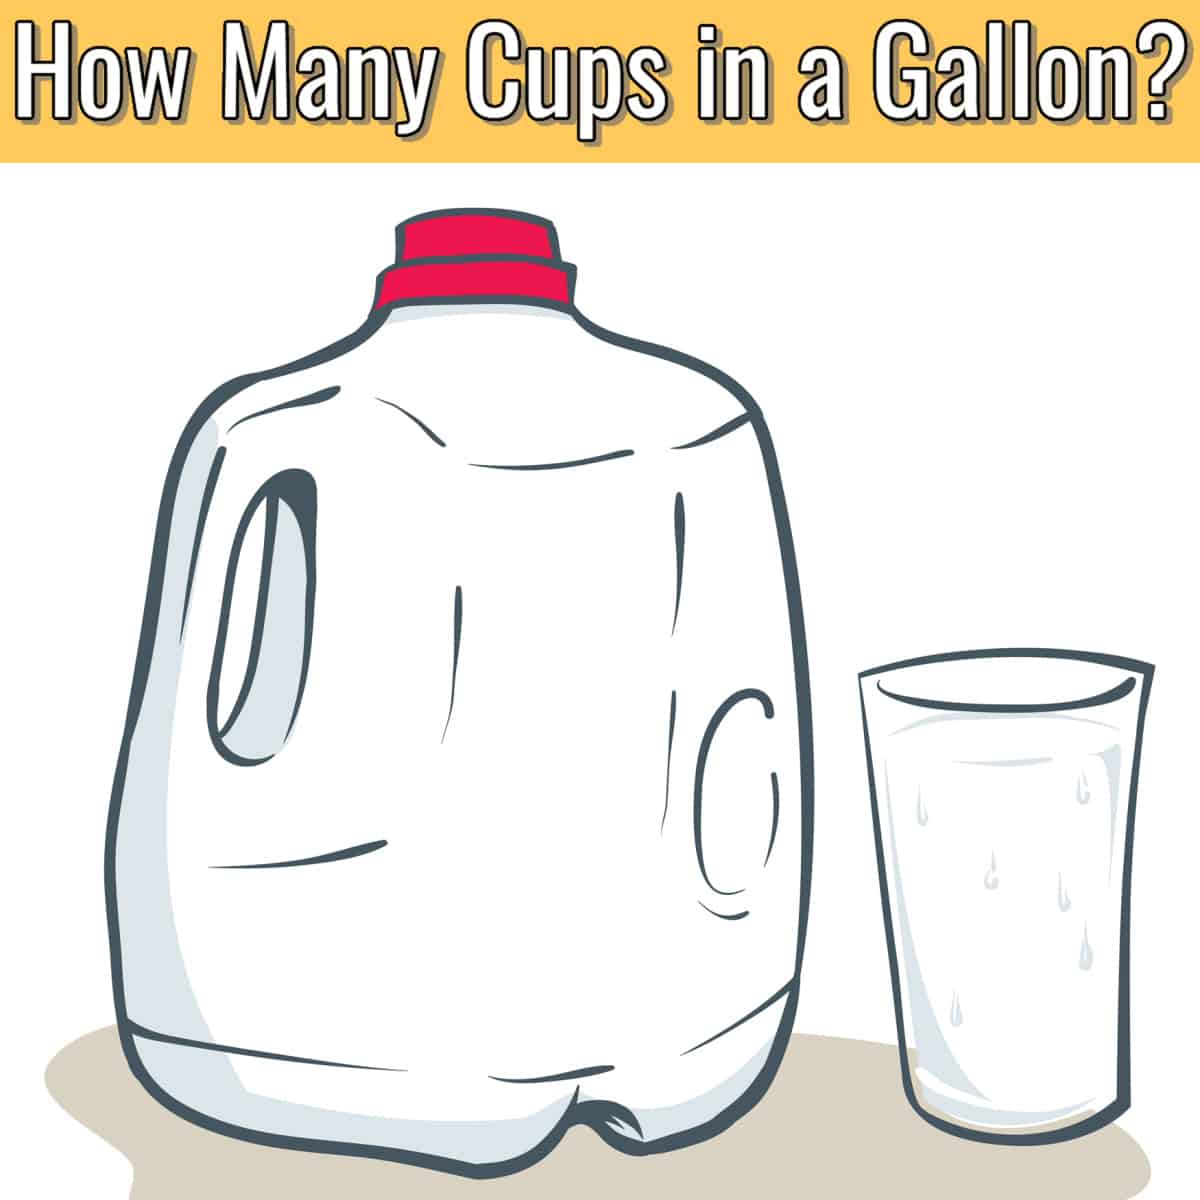 gallon jug of milk and a cup with text "How many cups in a gallon?"